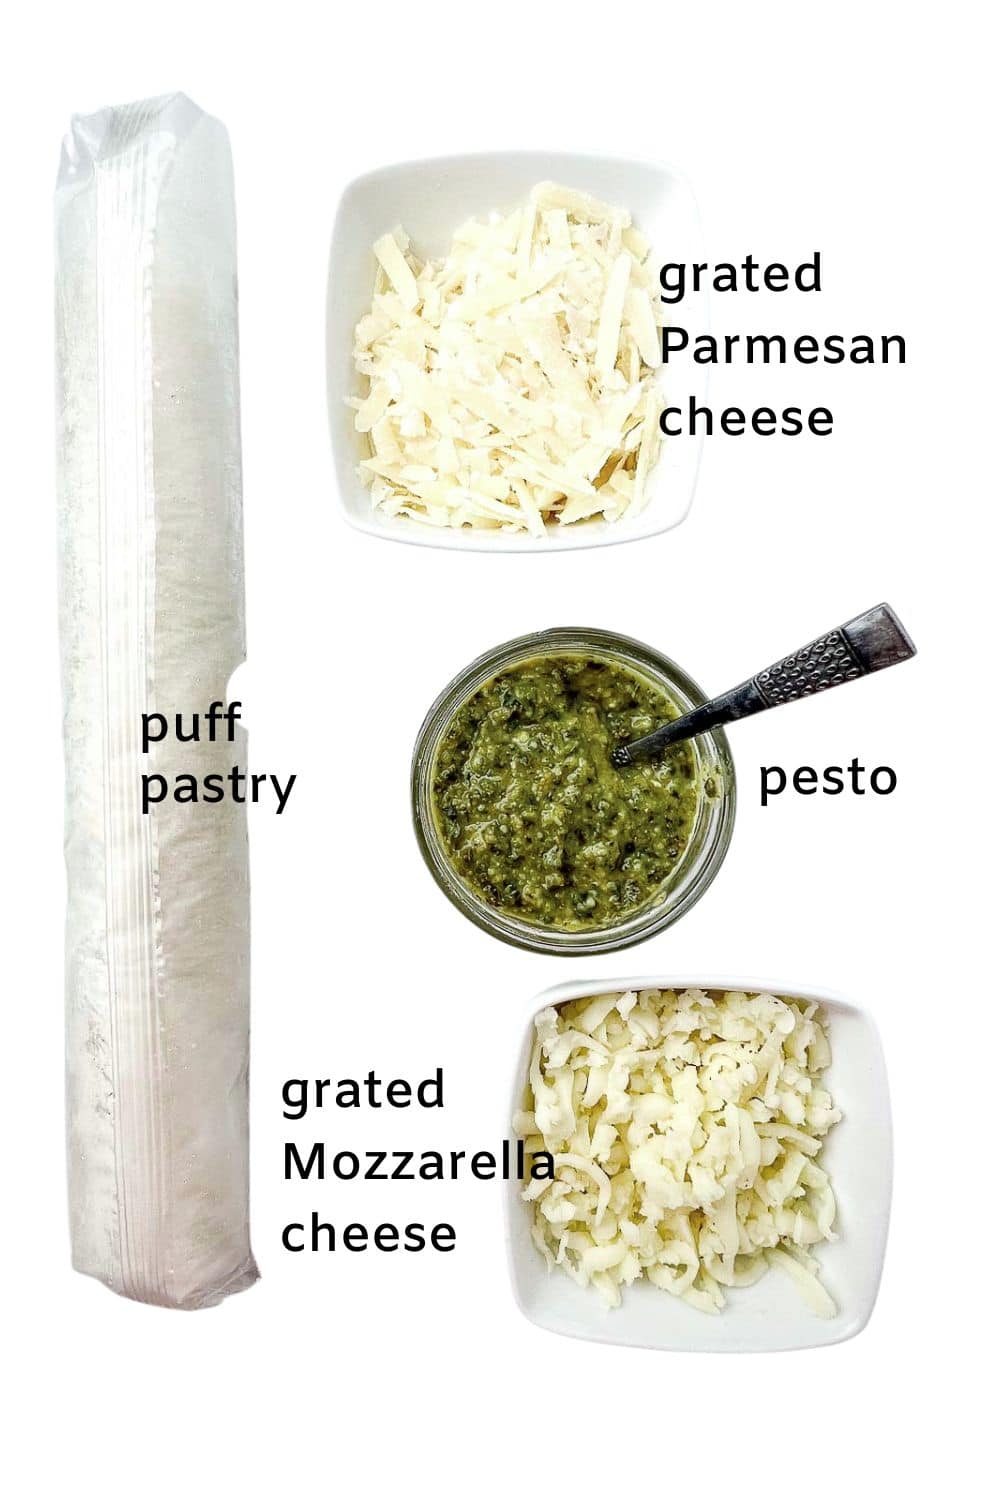 Labelled ingredients for puff pastry pesto pinwheels: puff pastry, grated Parmesan, pesto sauce, and grated Mozzarella cheese.